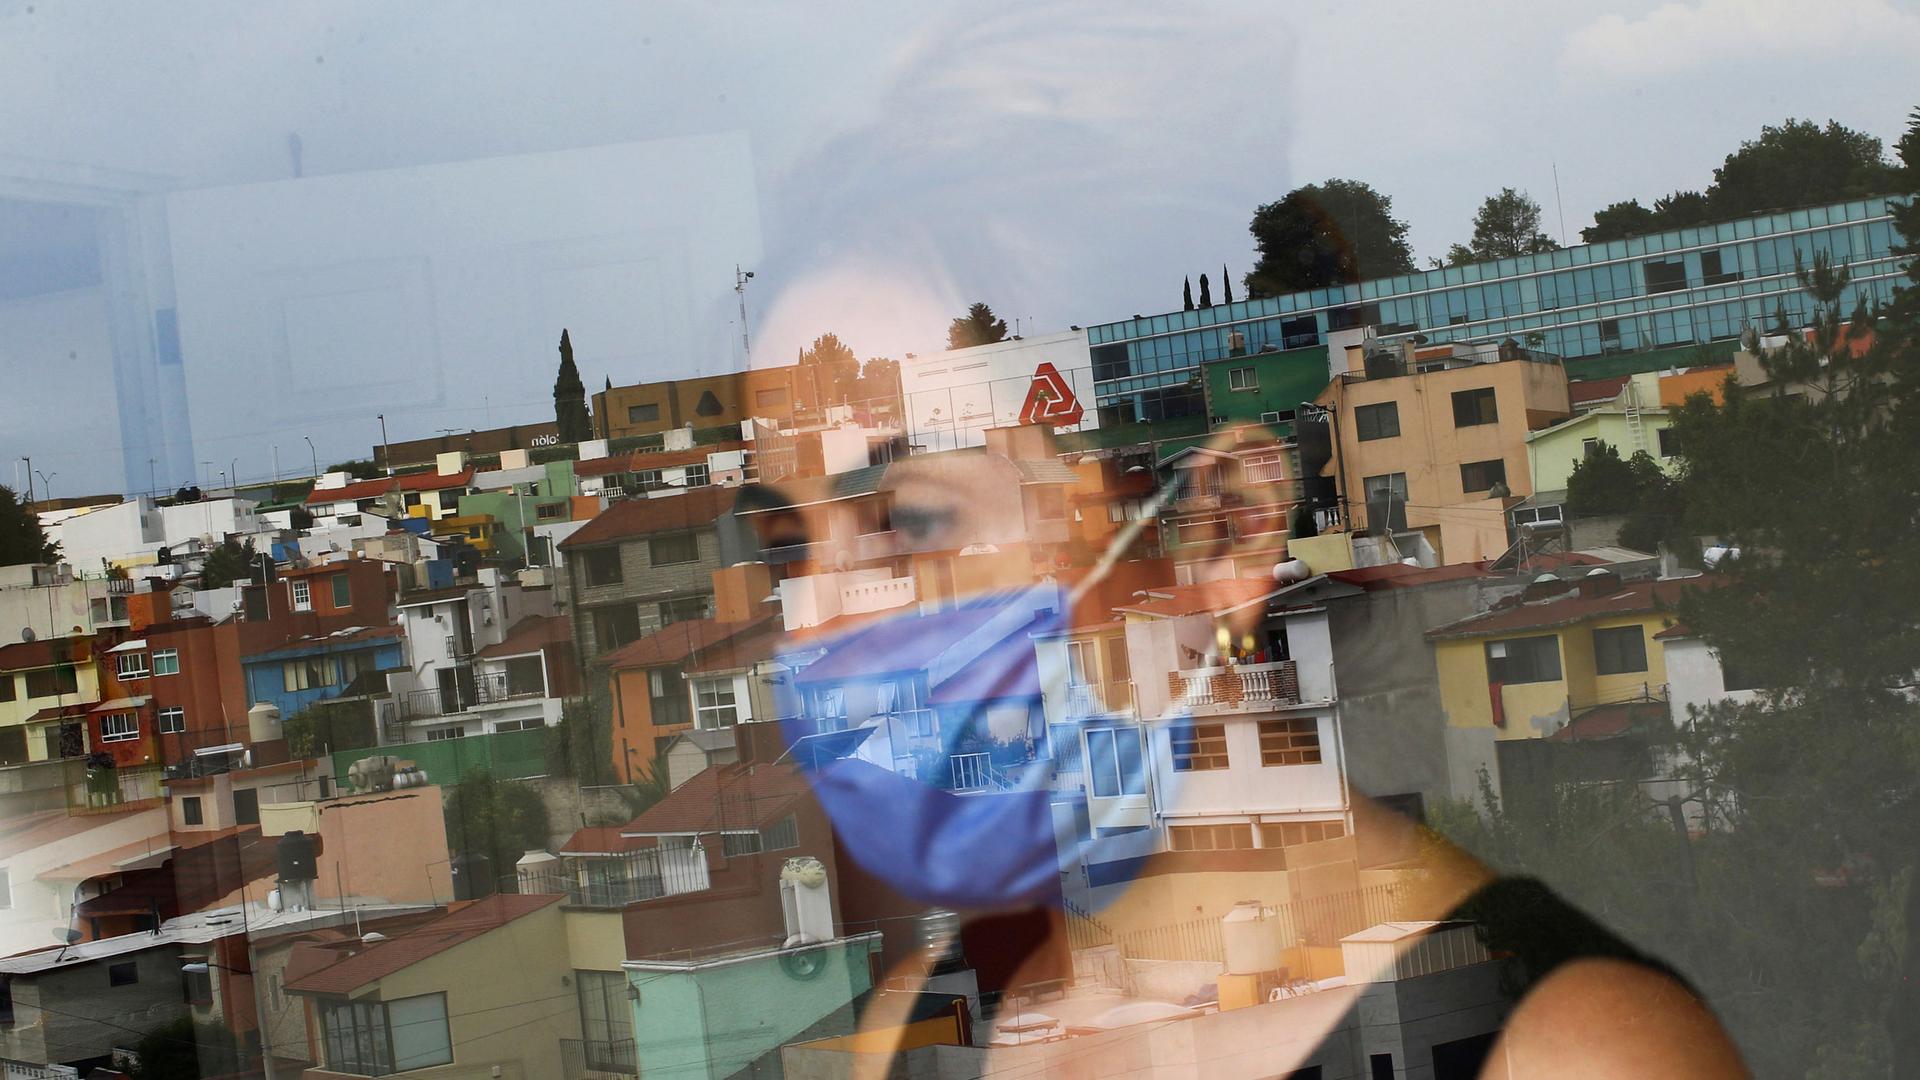 A woman is shown through a clear glass window with the reflection of a Mexico City neighborhood.